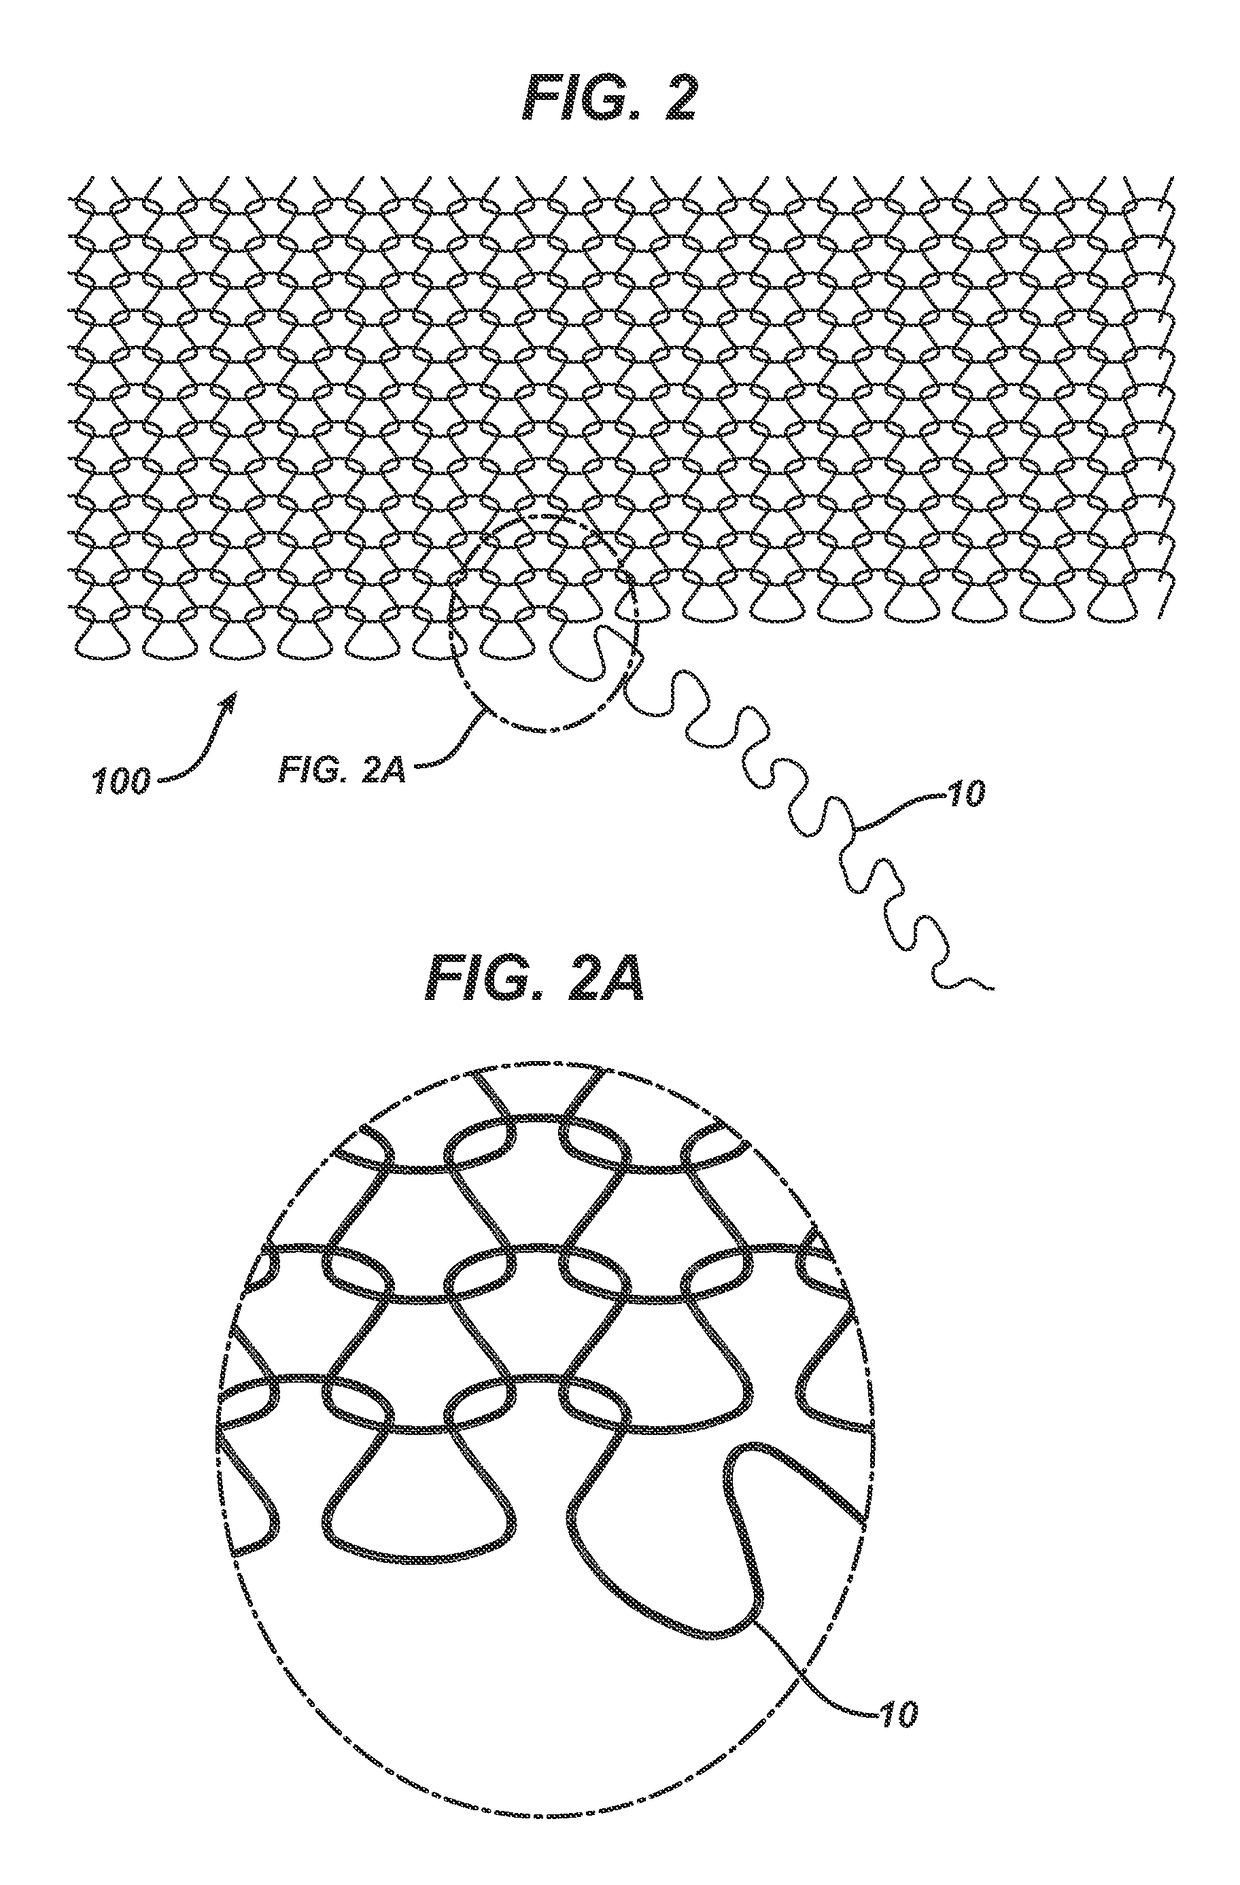 Randomly uniform three dimensional tissue scaffold of absorbable and non-absorbable materials